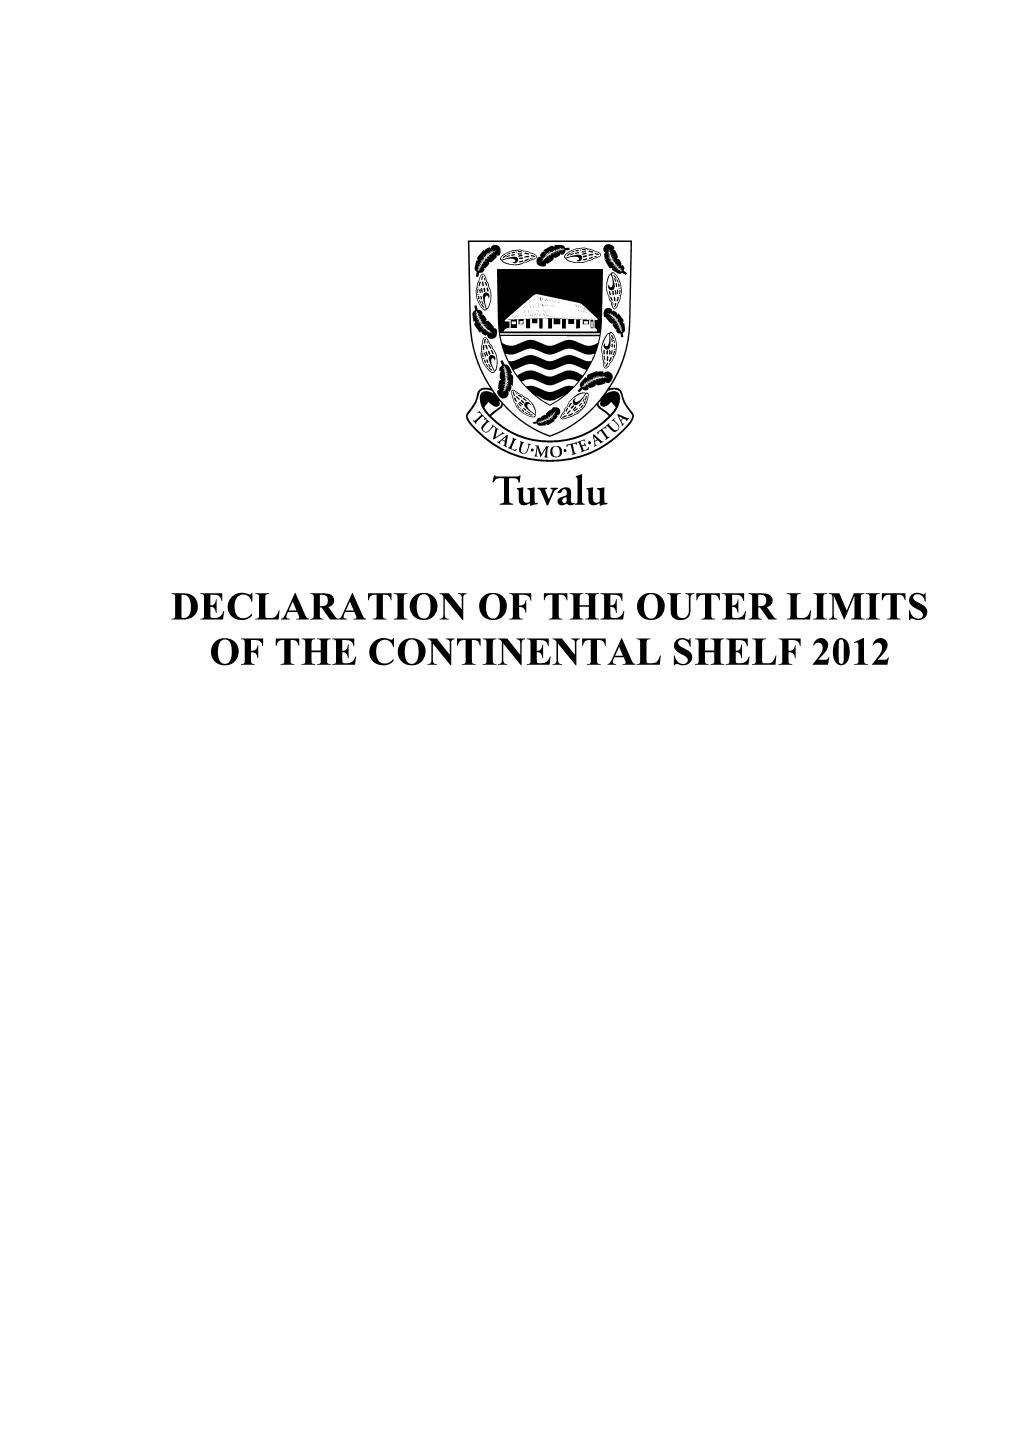 Declaration of the Outer Limits of the Continental Shelf 2012